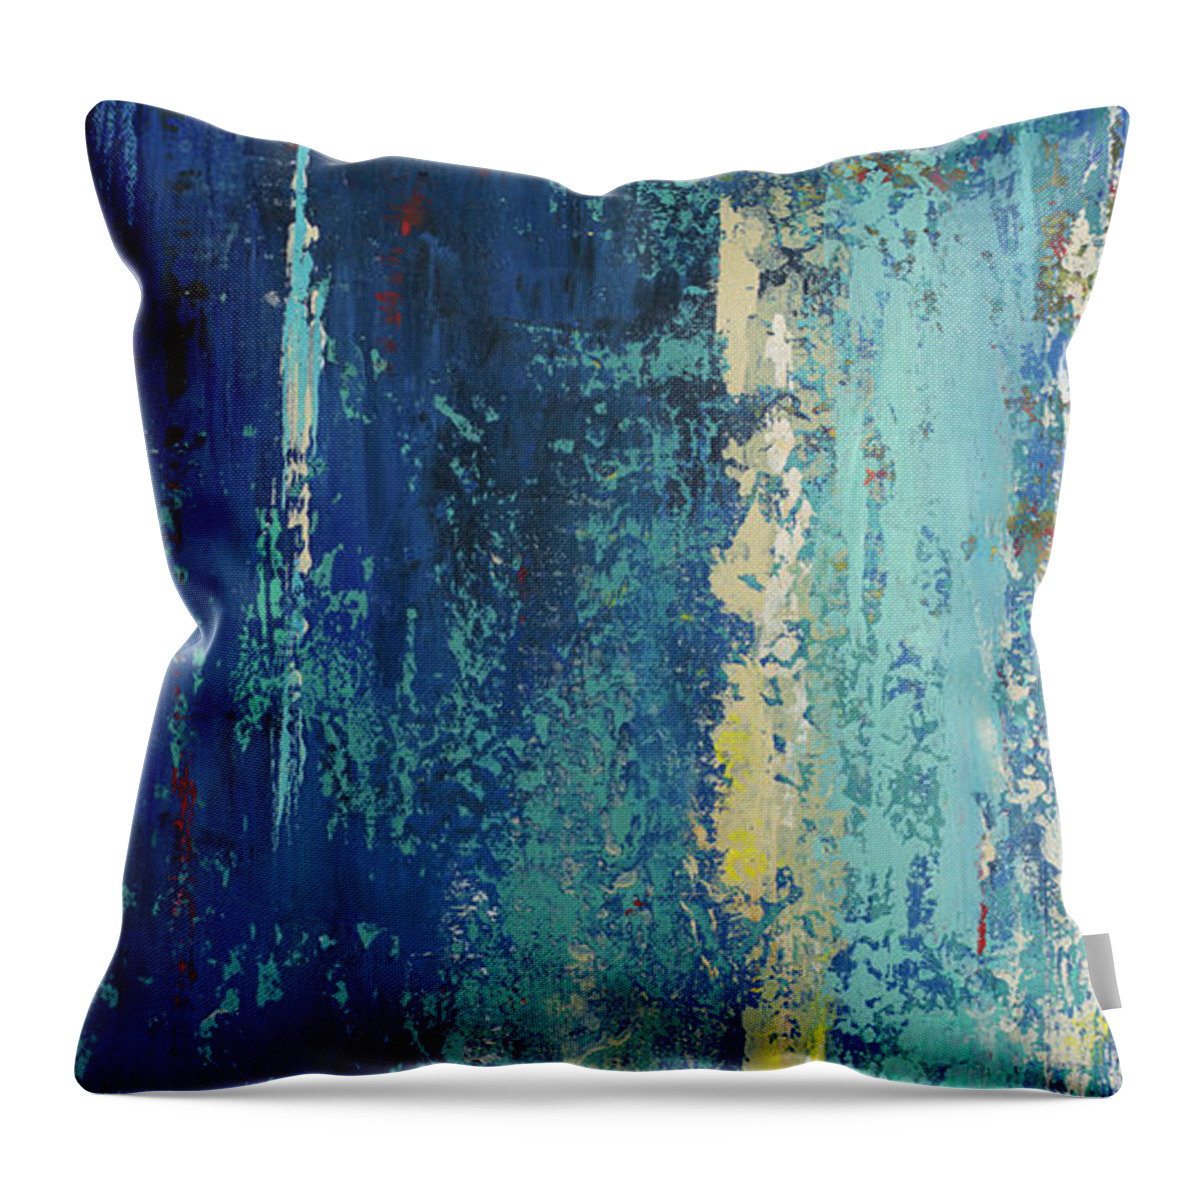 Blue Throw Pillow featuring the painting Deep Blue Abstract by Patricia Pinto